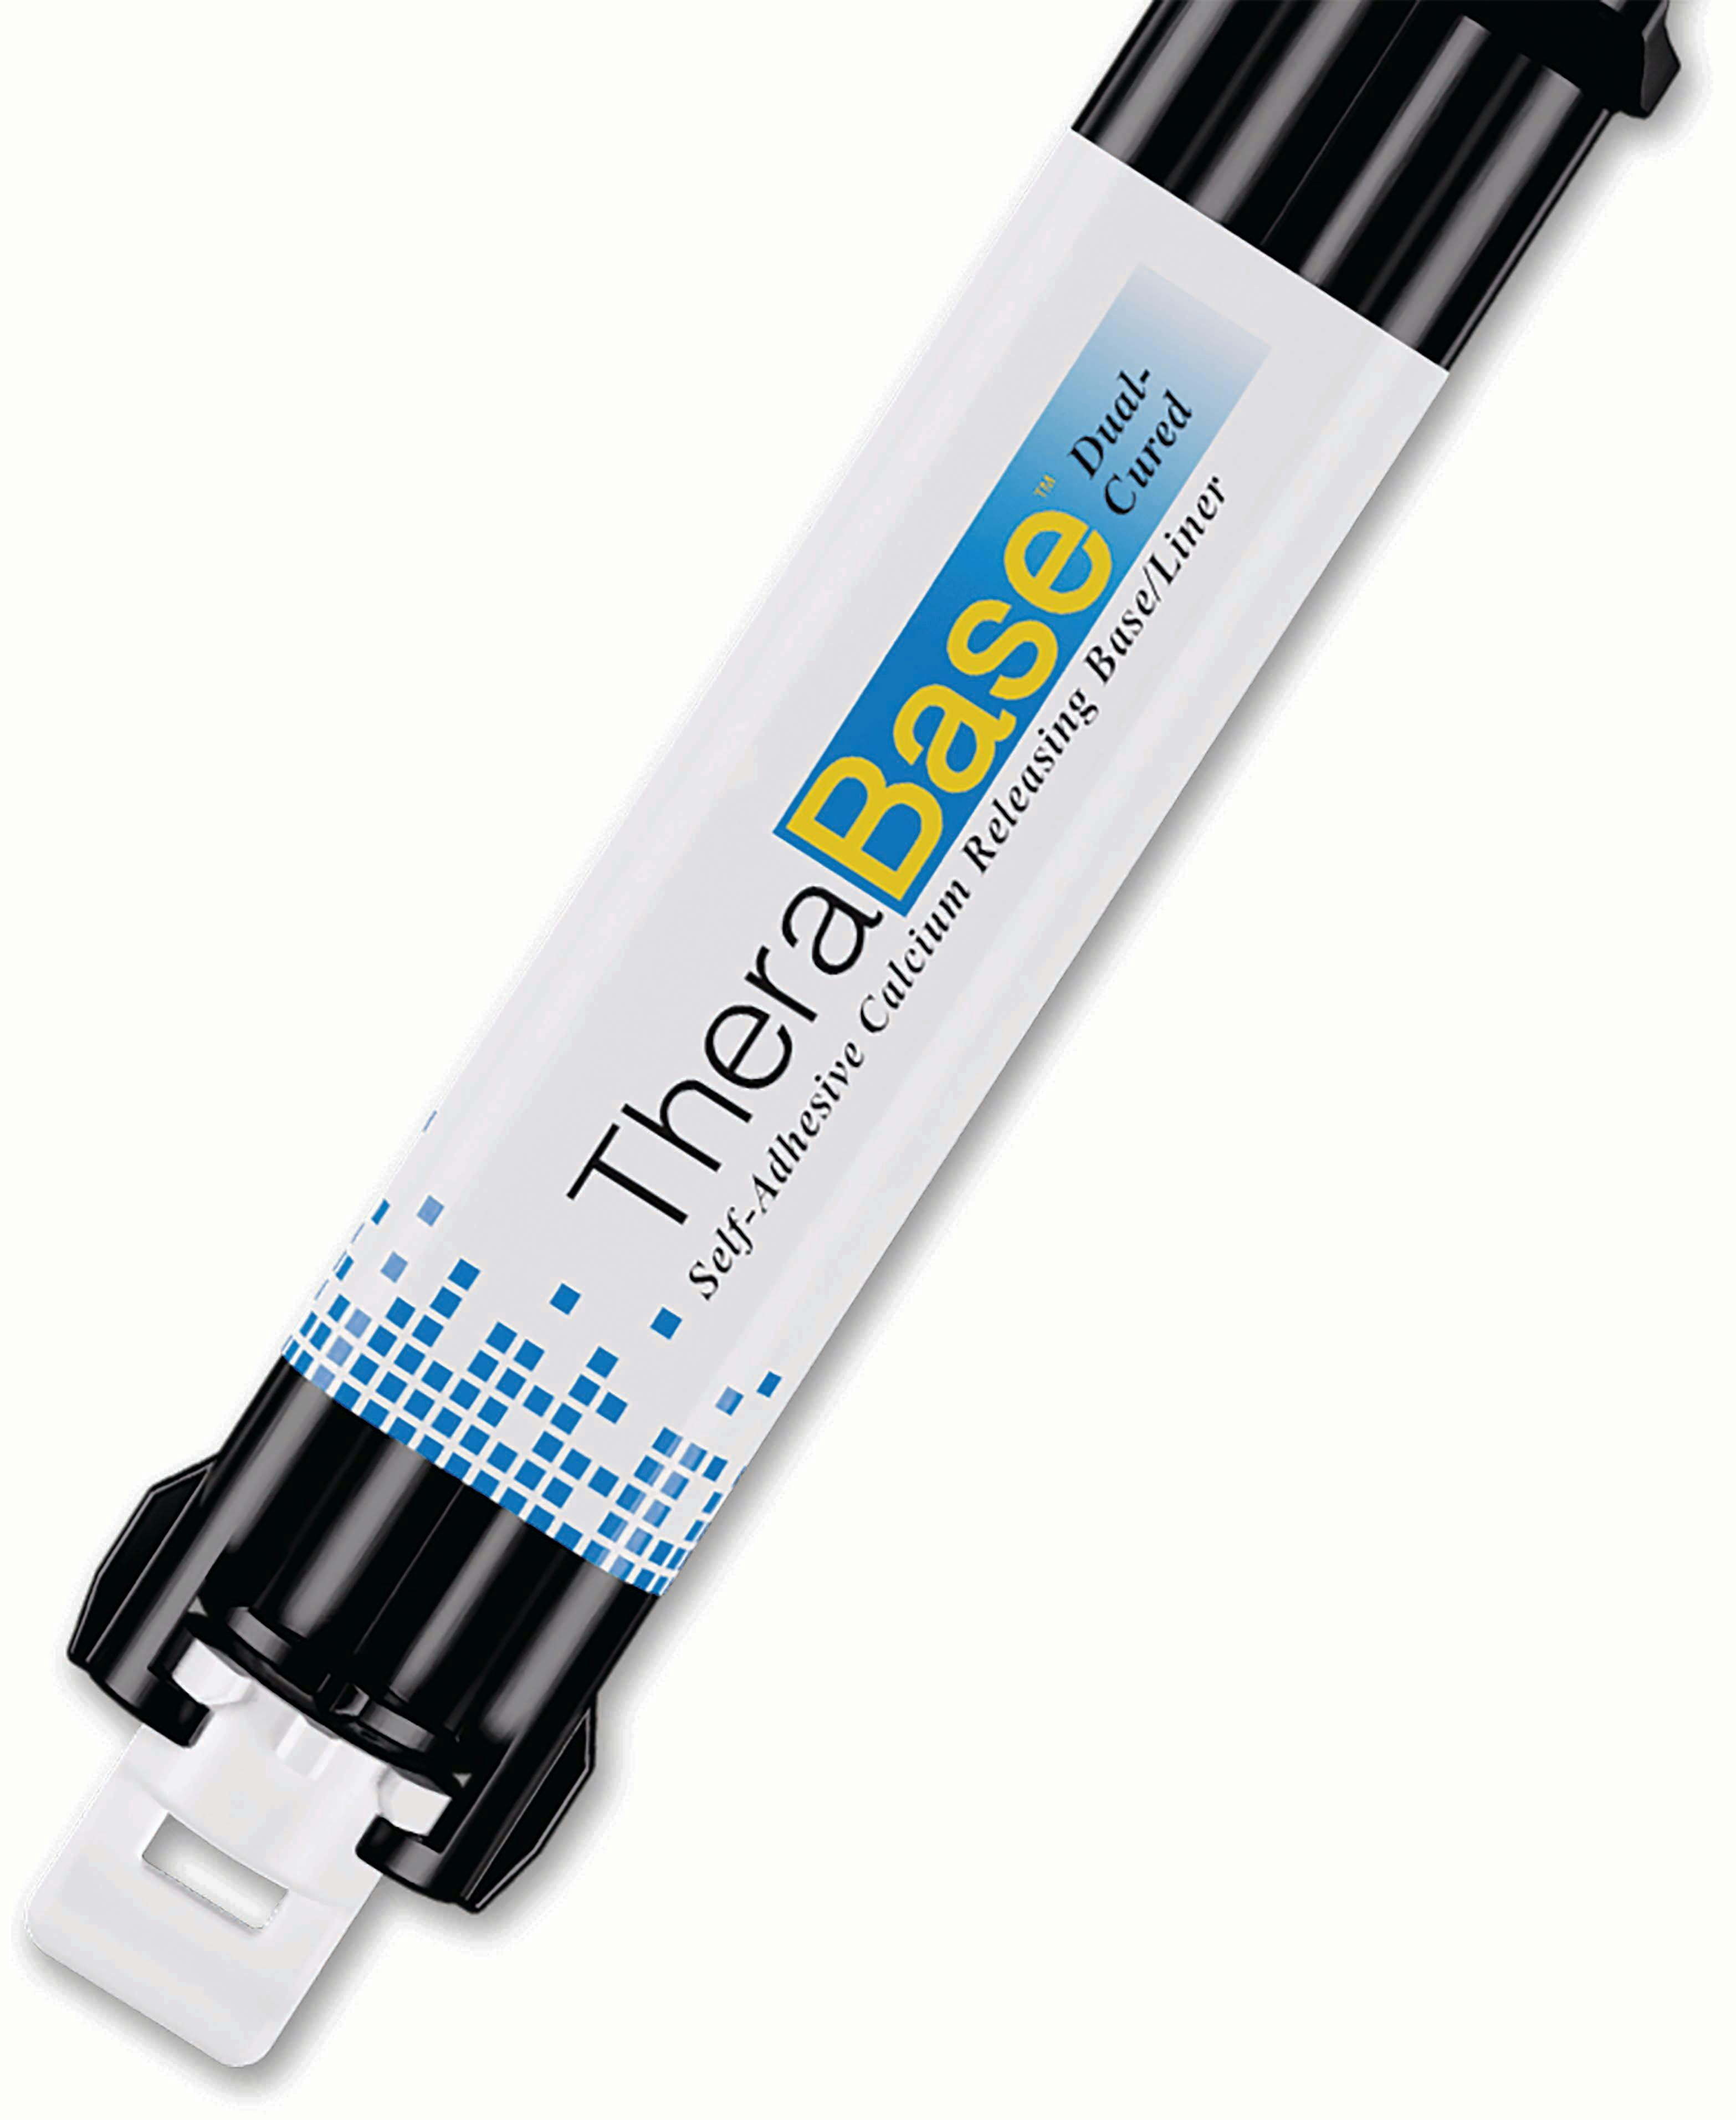 TheraBase Is the Latest Dental Product to Use THERA Technology